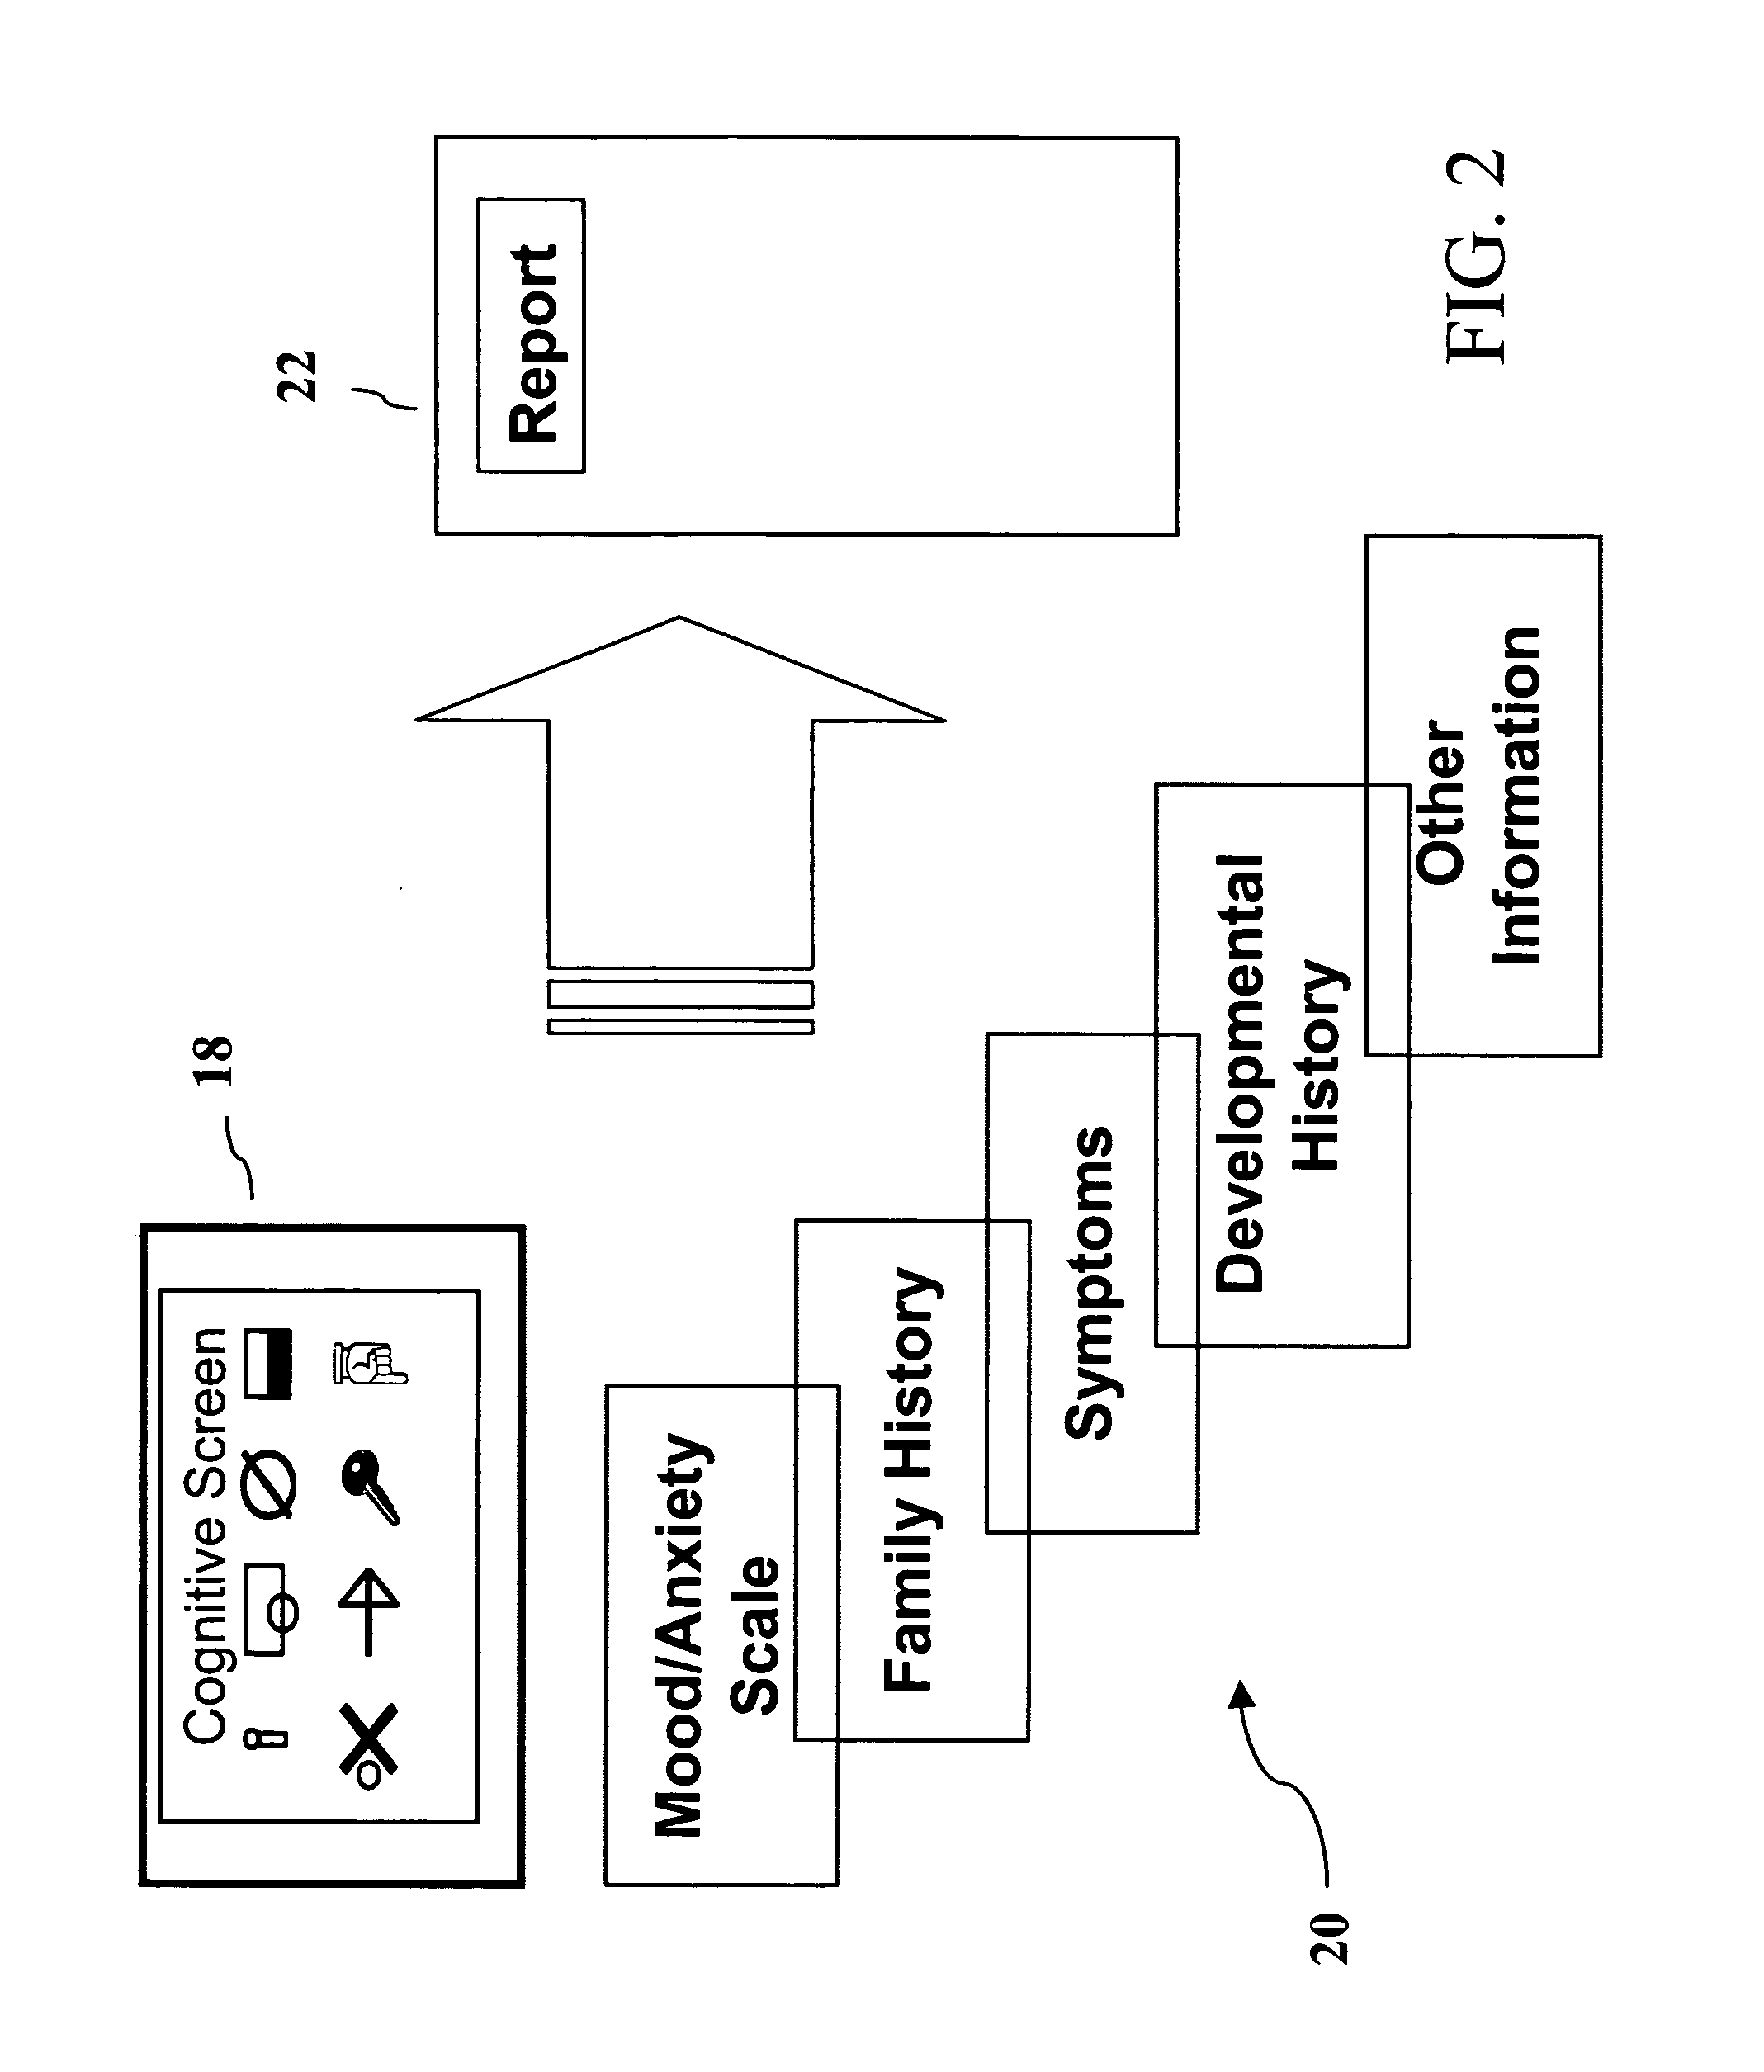 Standardized cognitive and behavioral screening tool